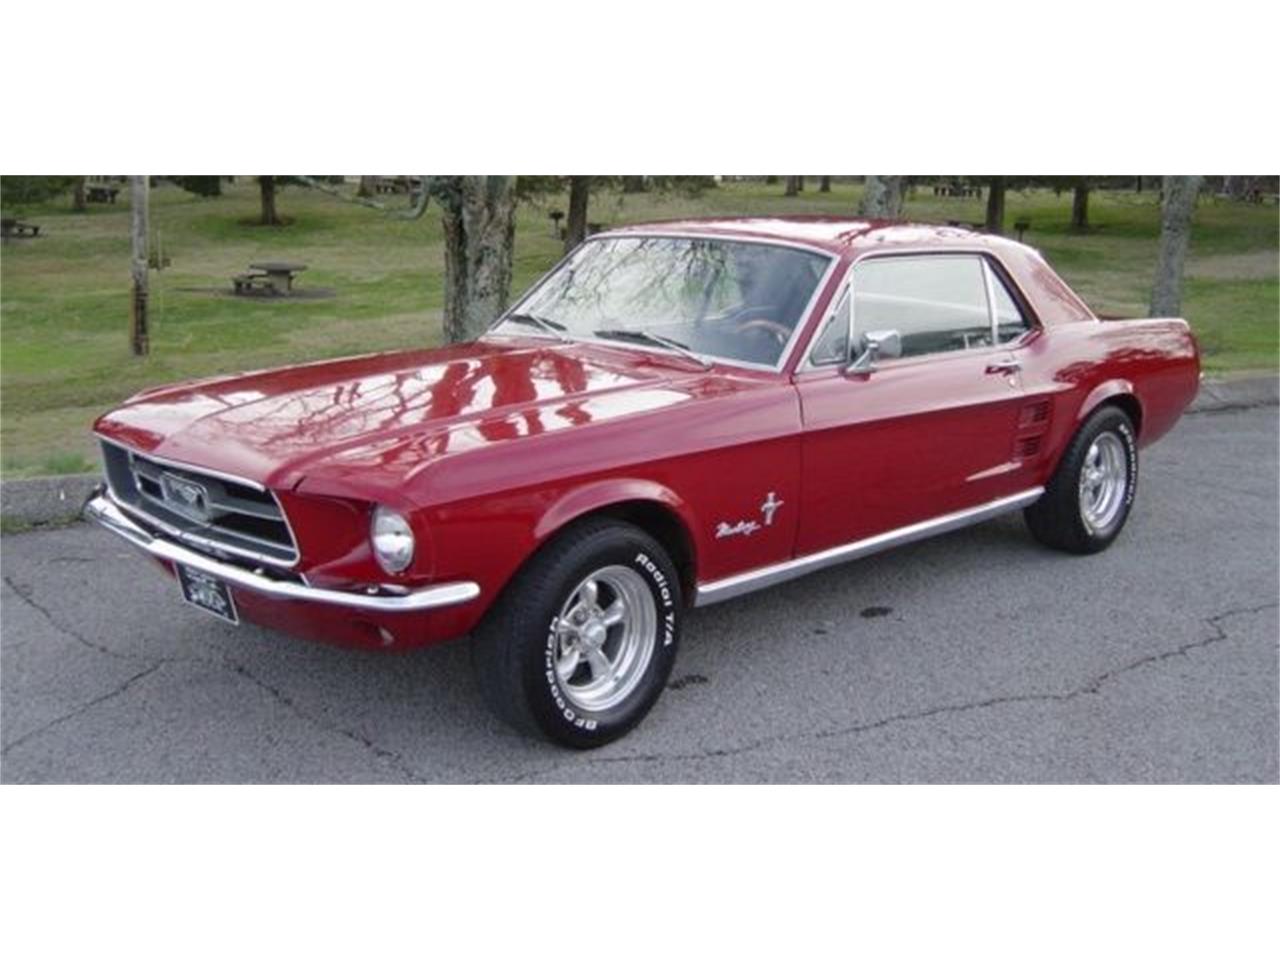 1963 To 1967 Mustang For Sale